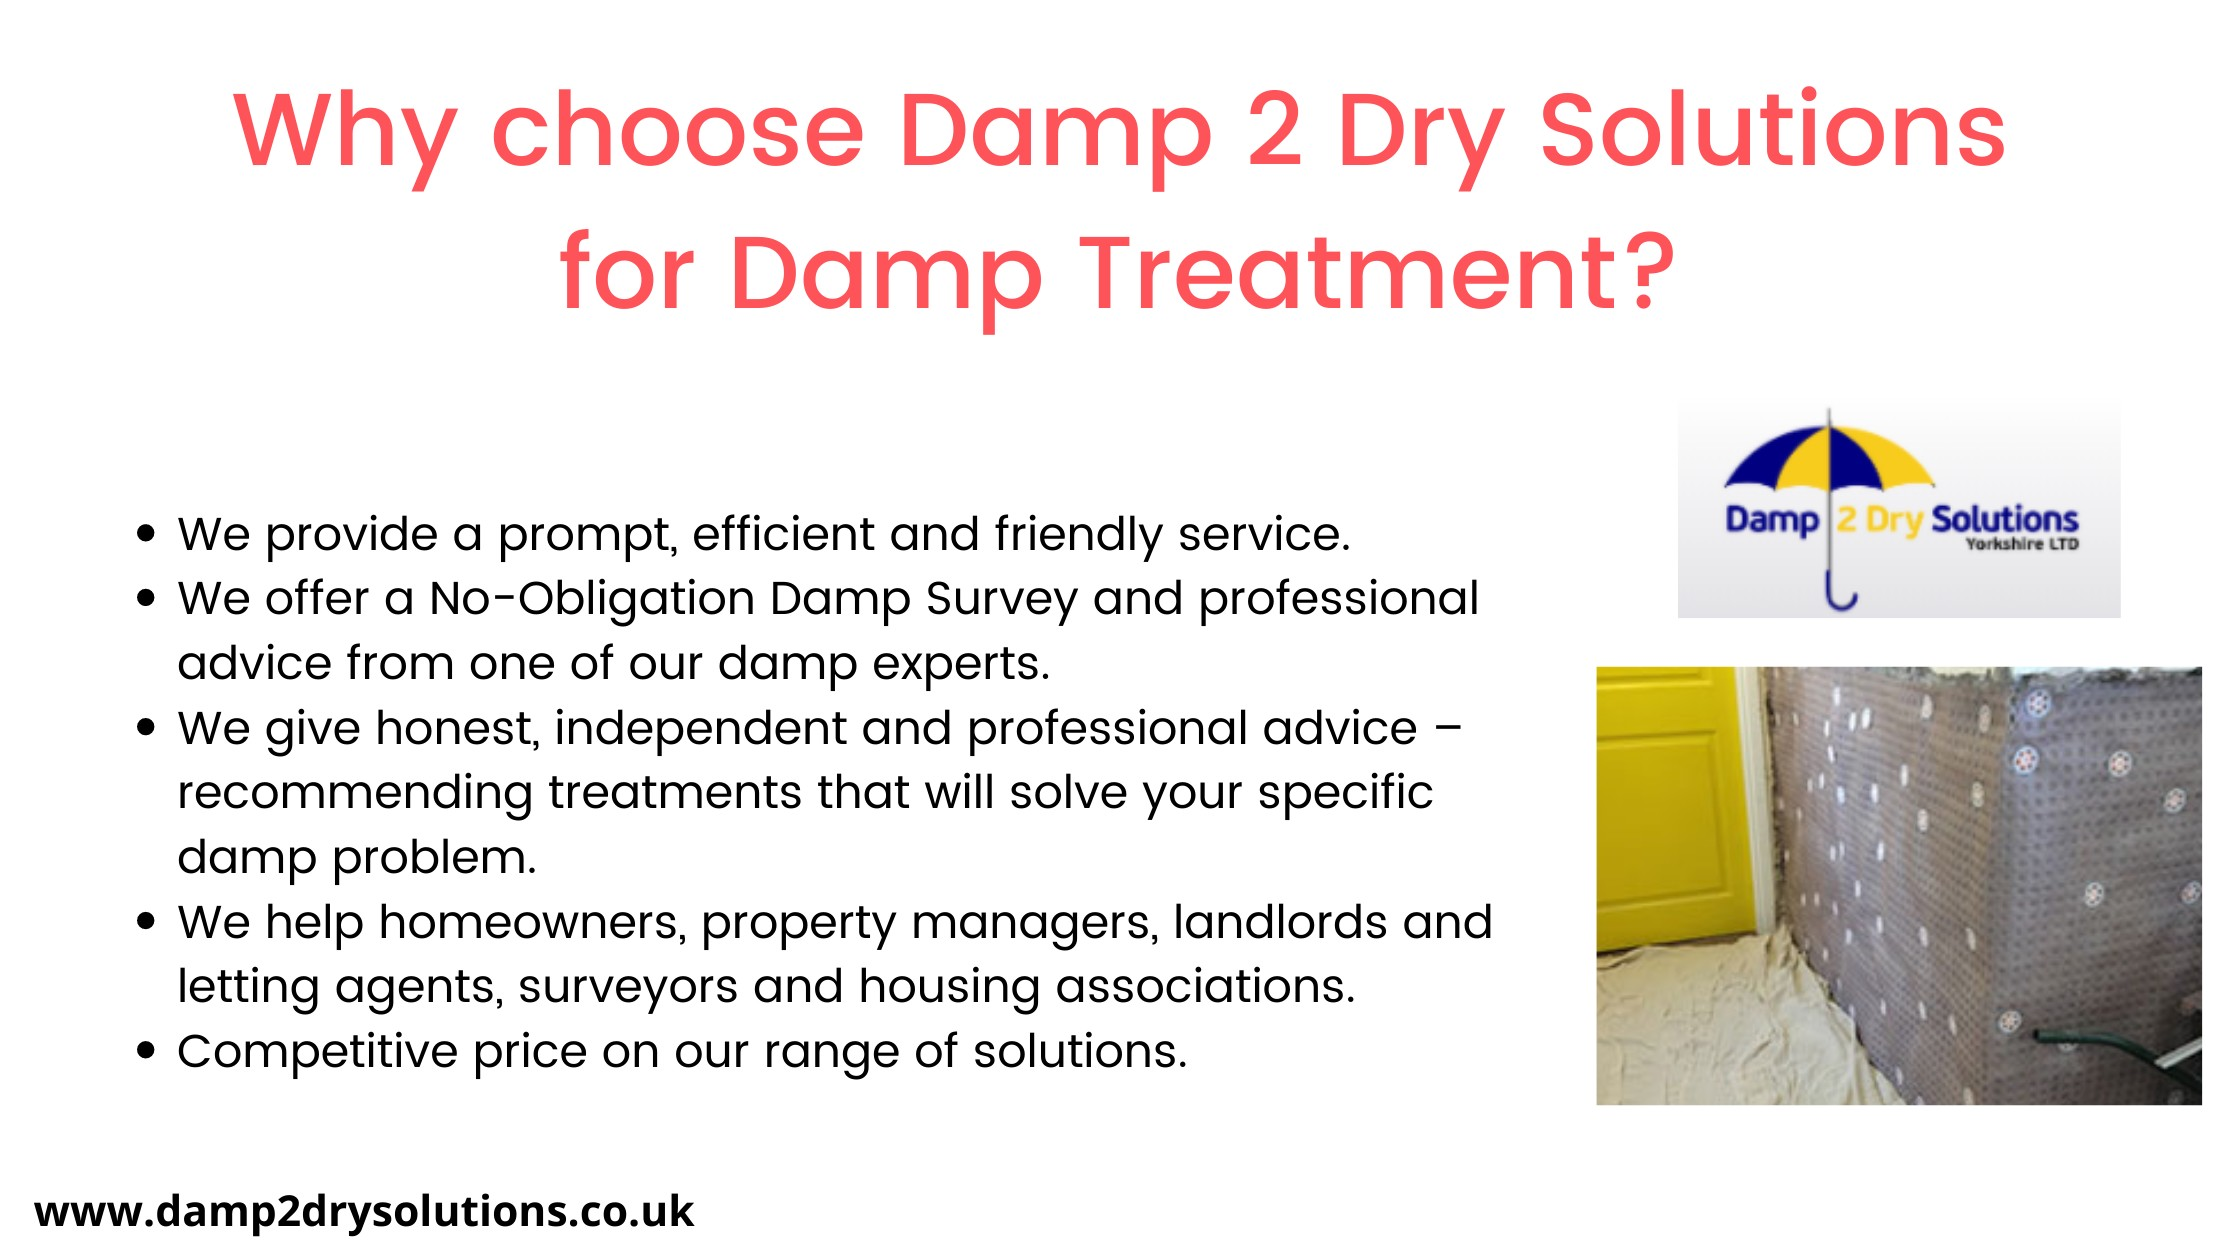 Choose Damp 2 Dry Solutions for Damp Treatment